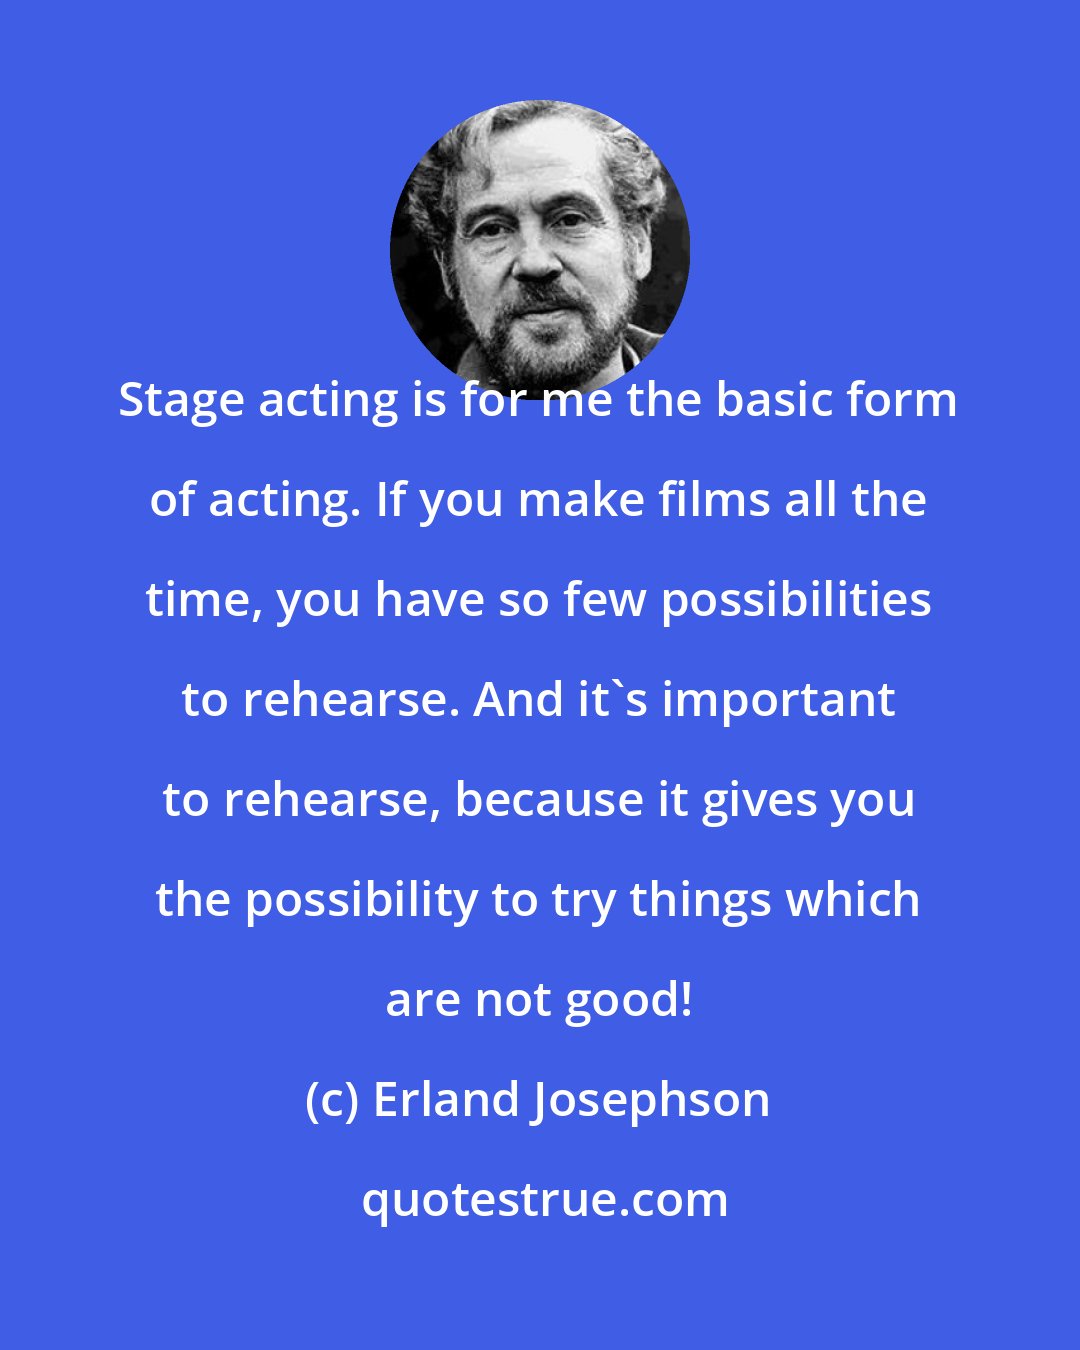 Erland Josephson: Stage acting is for me the basic form of acting. If you make films all the time, you have so few possibilities to rehearse. And it's important to rehearse, because it gives you the possibility to try things which are not good!